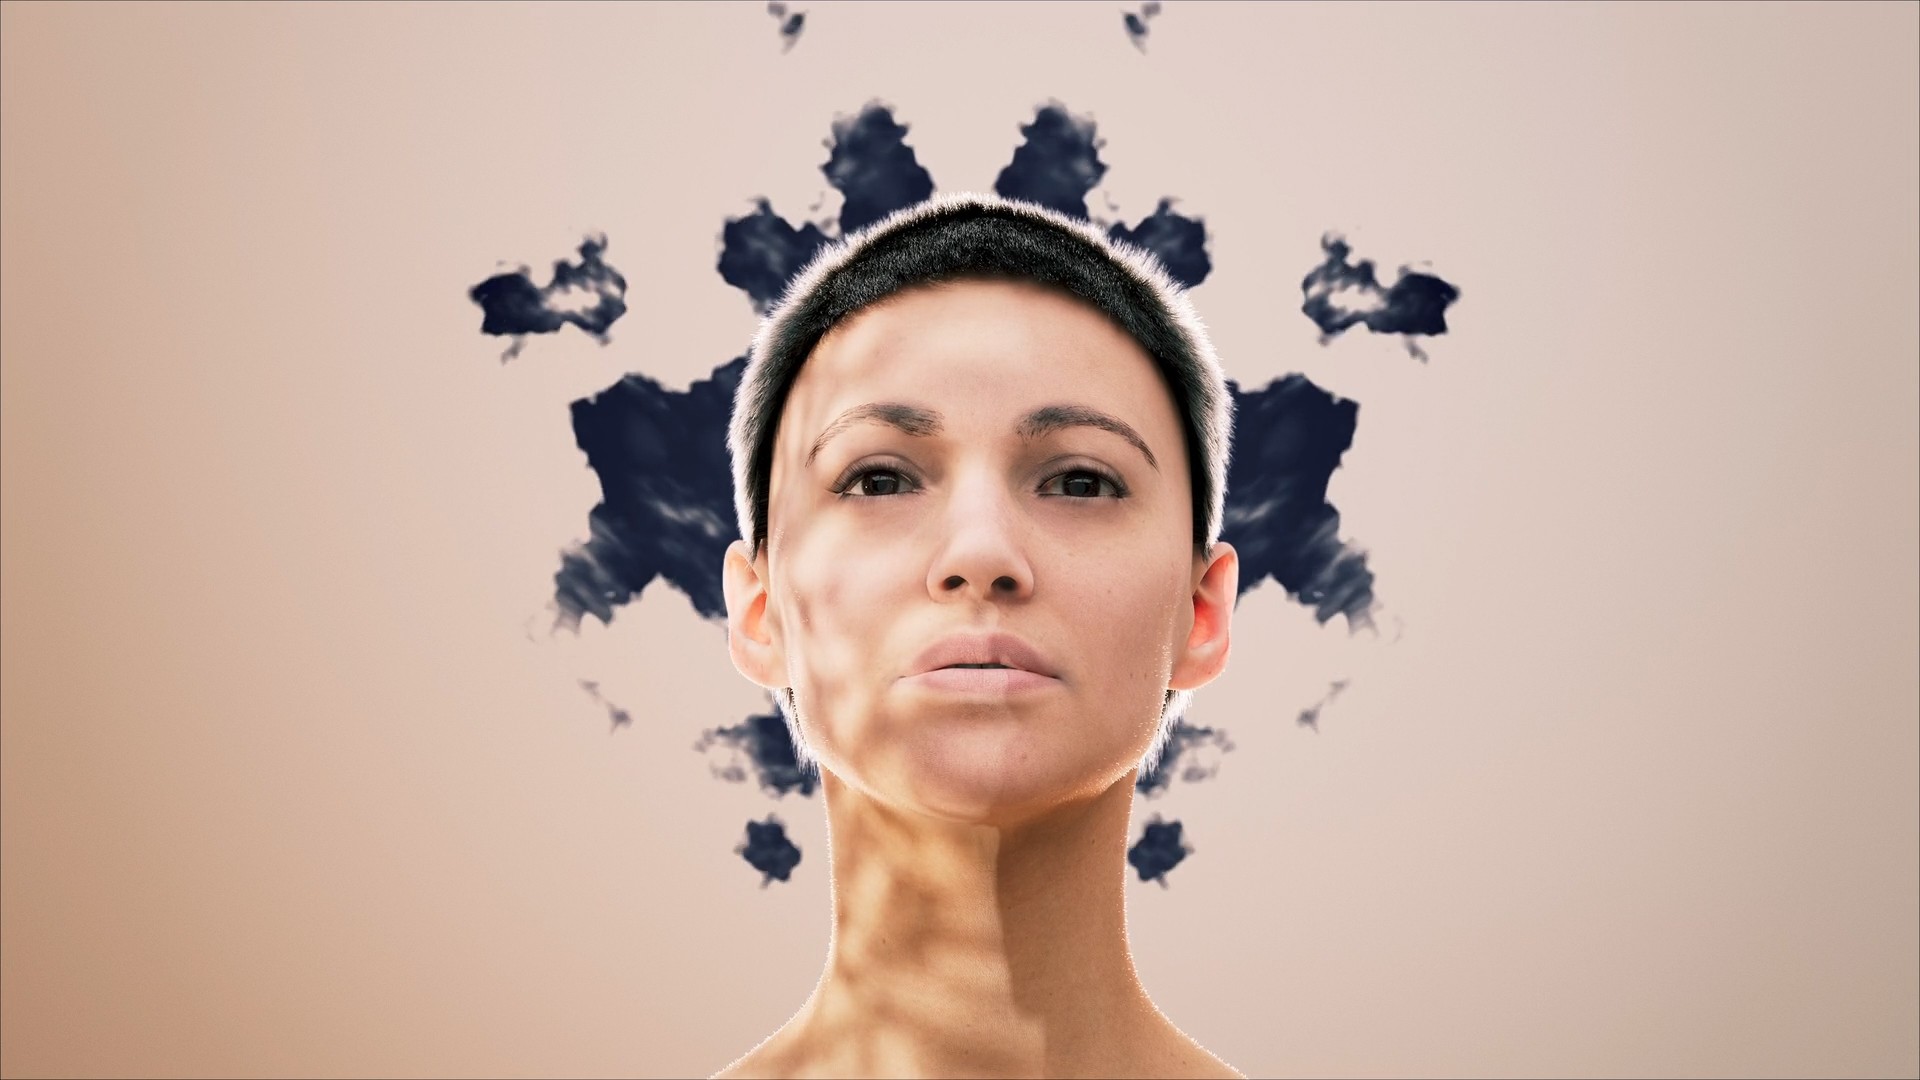 3D animation of Face with rorschach ink patterns in background to visualis schizophrenia.jpg